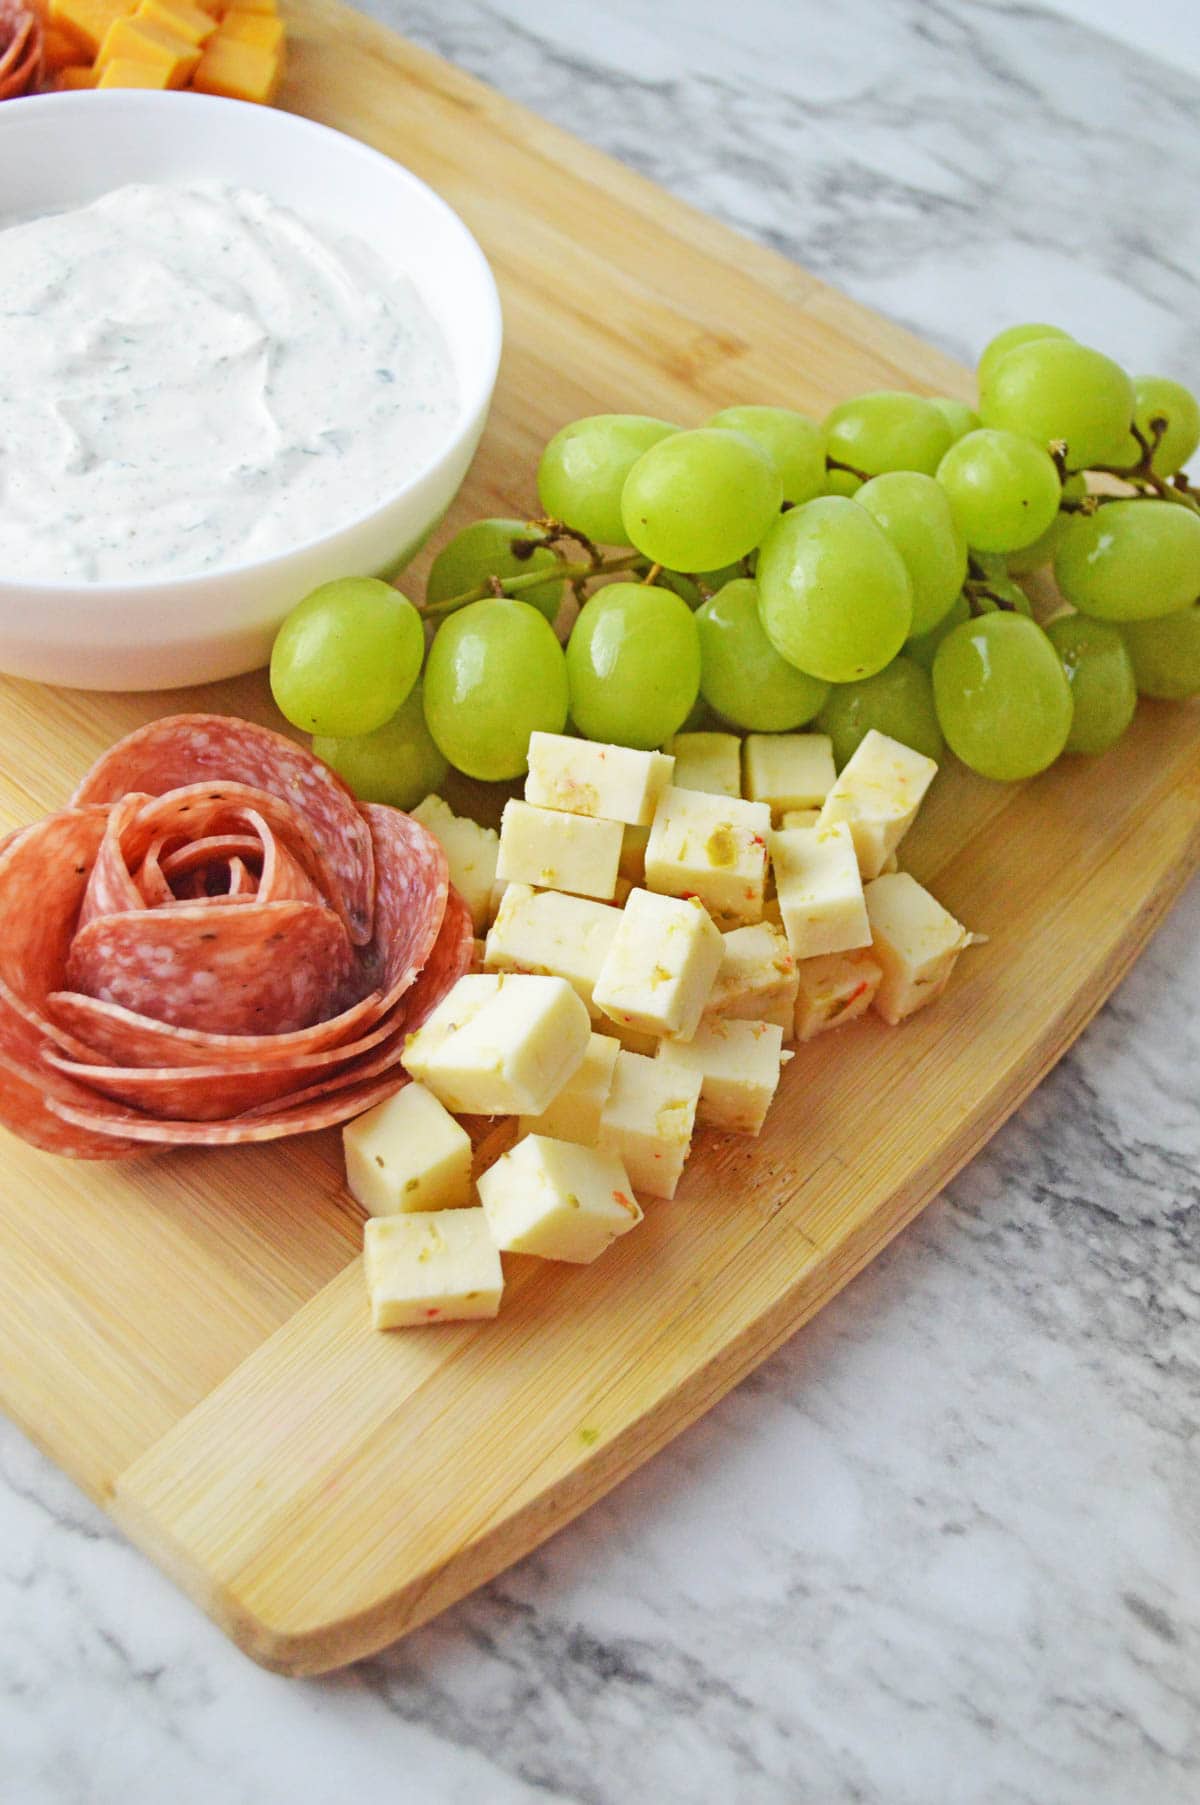 Cheese added to cutting board with fruit and meat